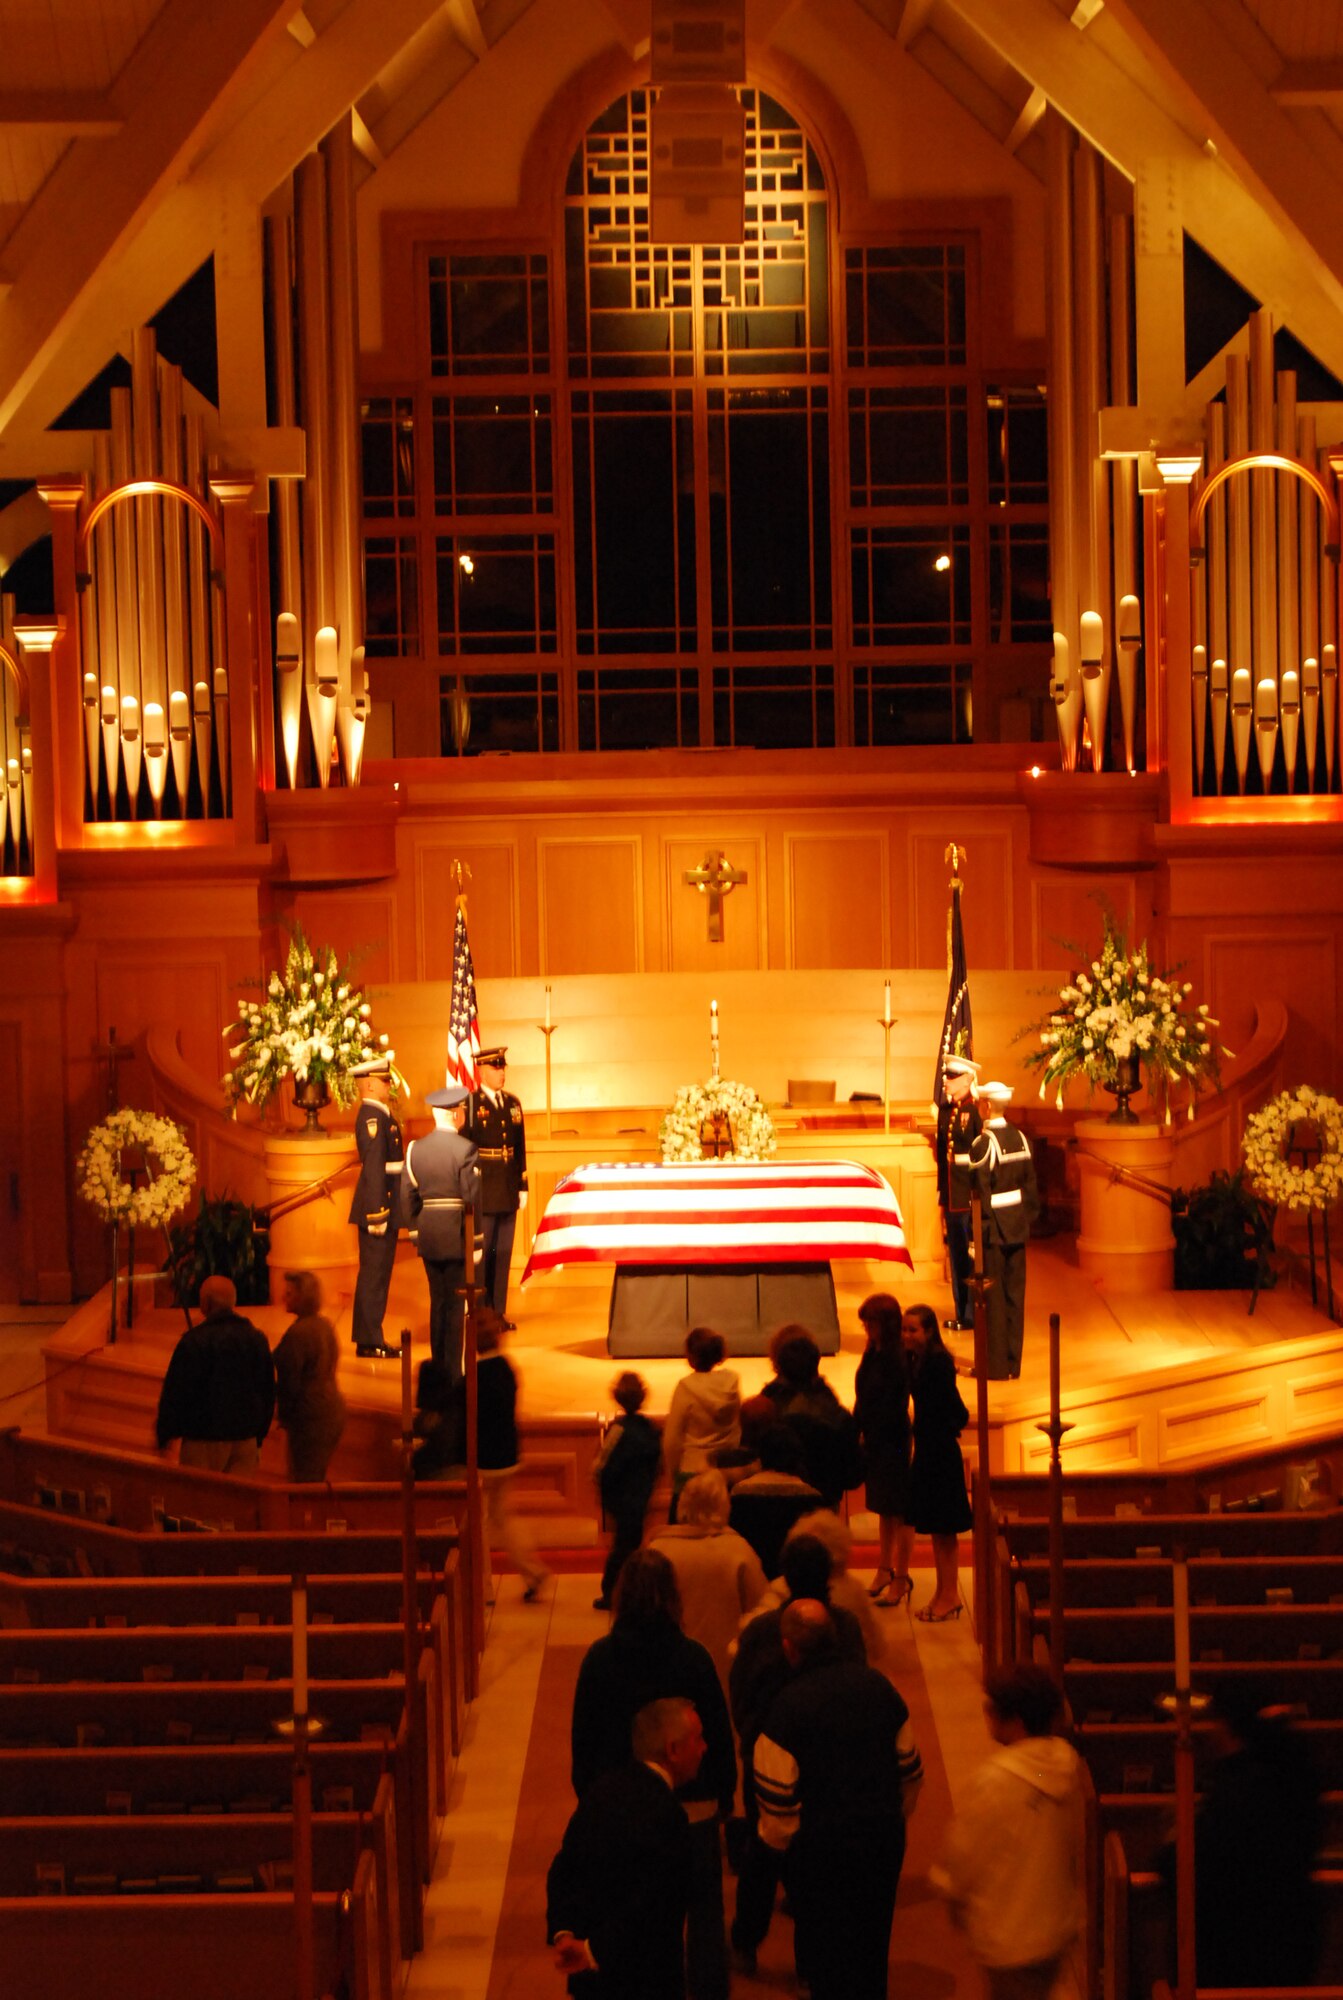 Former President Gerald R. Ford lies in repose at St. Margaret's Episcopal Church in Palm Desert, California, as citizens from the surrounding community pay their respects. More than 500 military members are in Palm Desert supporting the California portion of the State Funeral for the former president. The military is providing ceremonial, logistics, and security support to honor and pay tribute to the former Commander-in-Chief and the Ford family. Ford died in Palm Desert, California, Dec. 26 at the age of 93. (U.S. Air Force Photo/1st Lt Carrie L. Kessler)